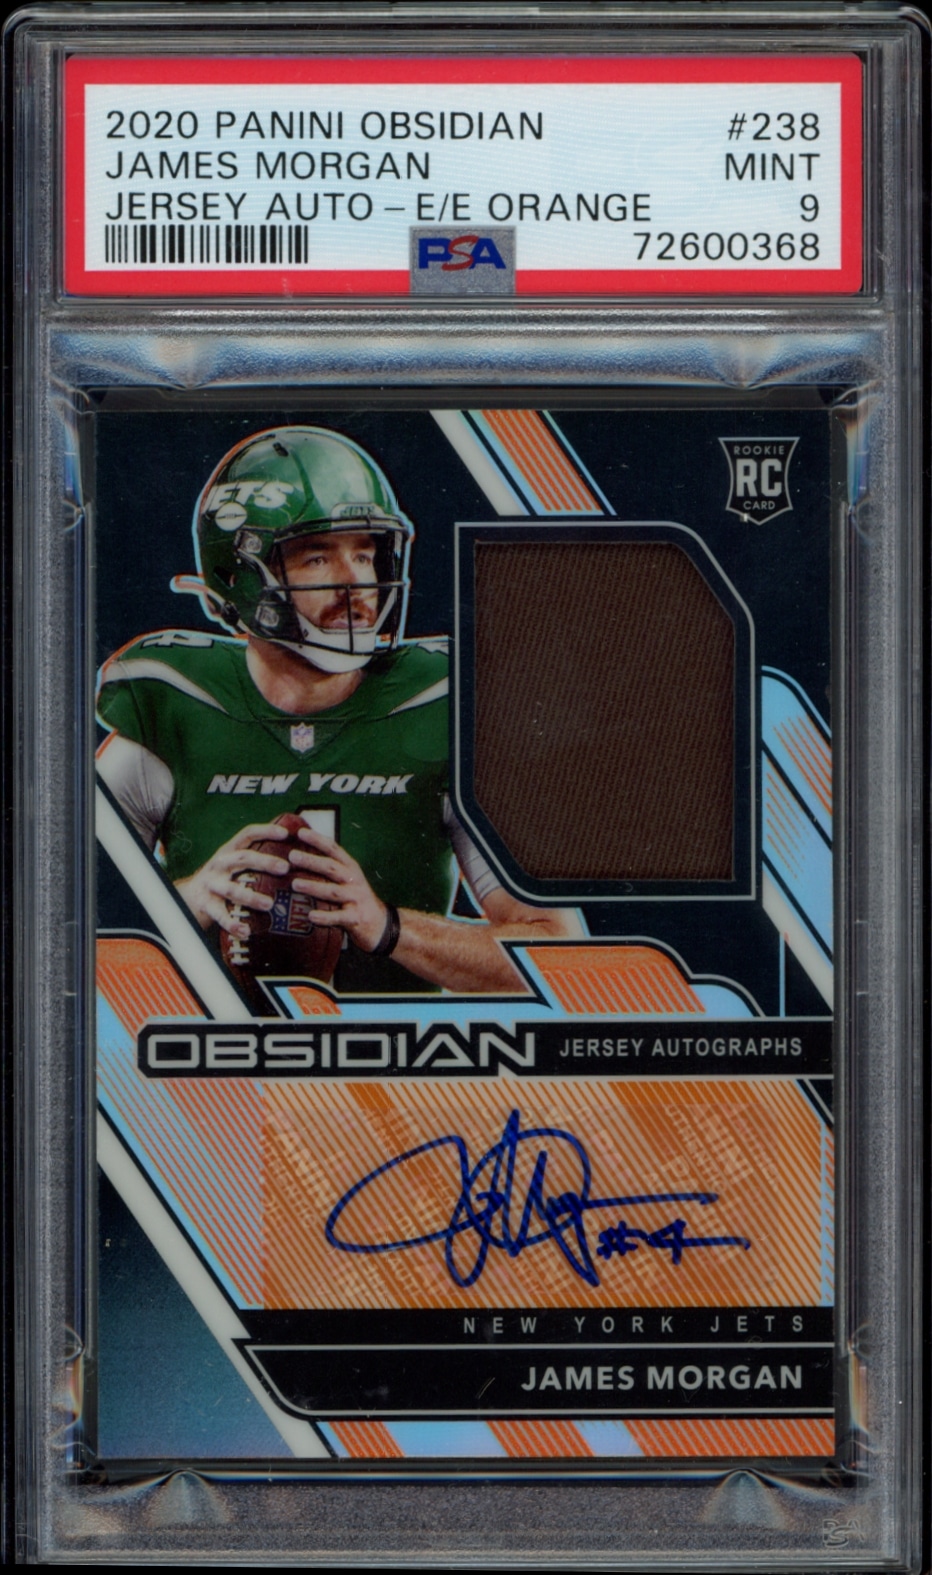 James Morgans 2020 Panini Obsidian Rookie Jersey Auto Card, graded Mint 9 by PSA.